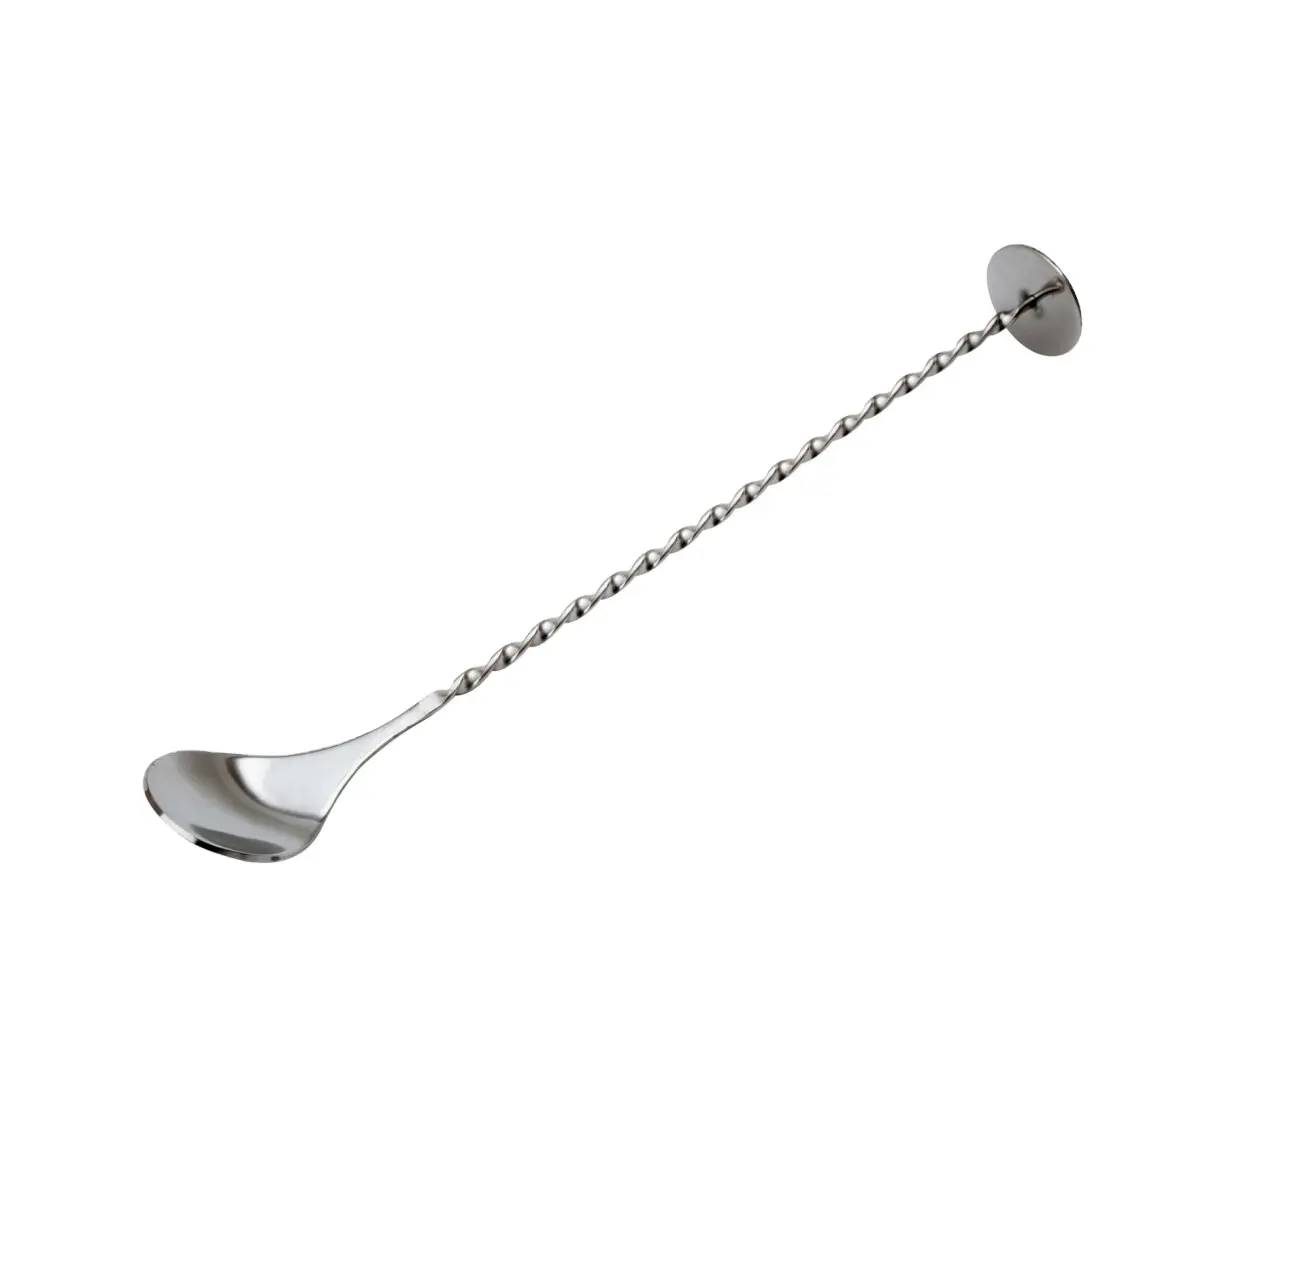 Antique look bar spoon made of solid brass and stainless steel metal and brass Design bar manufactured in India